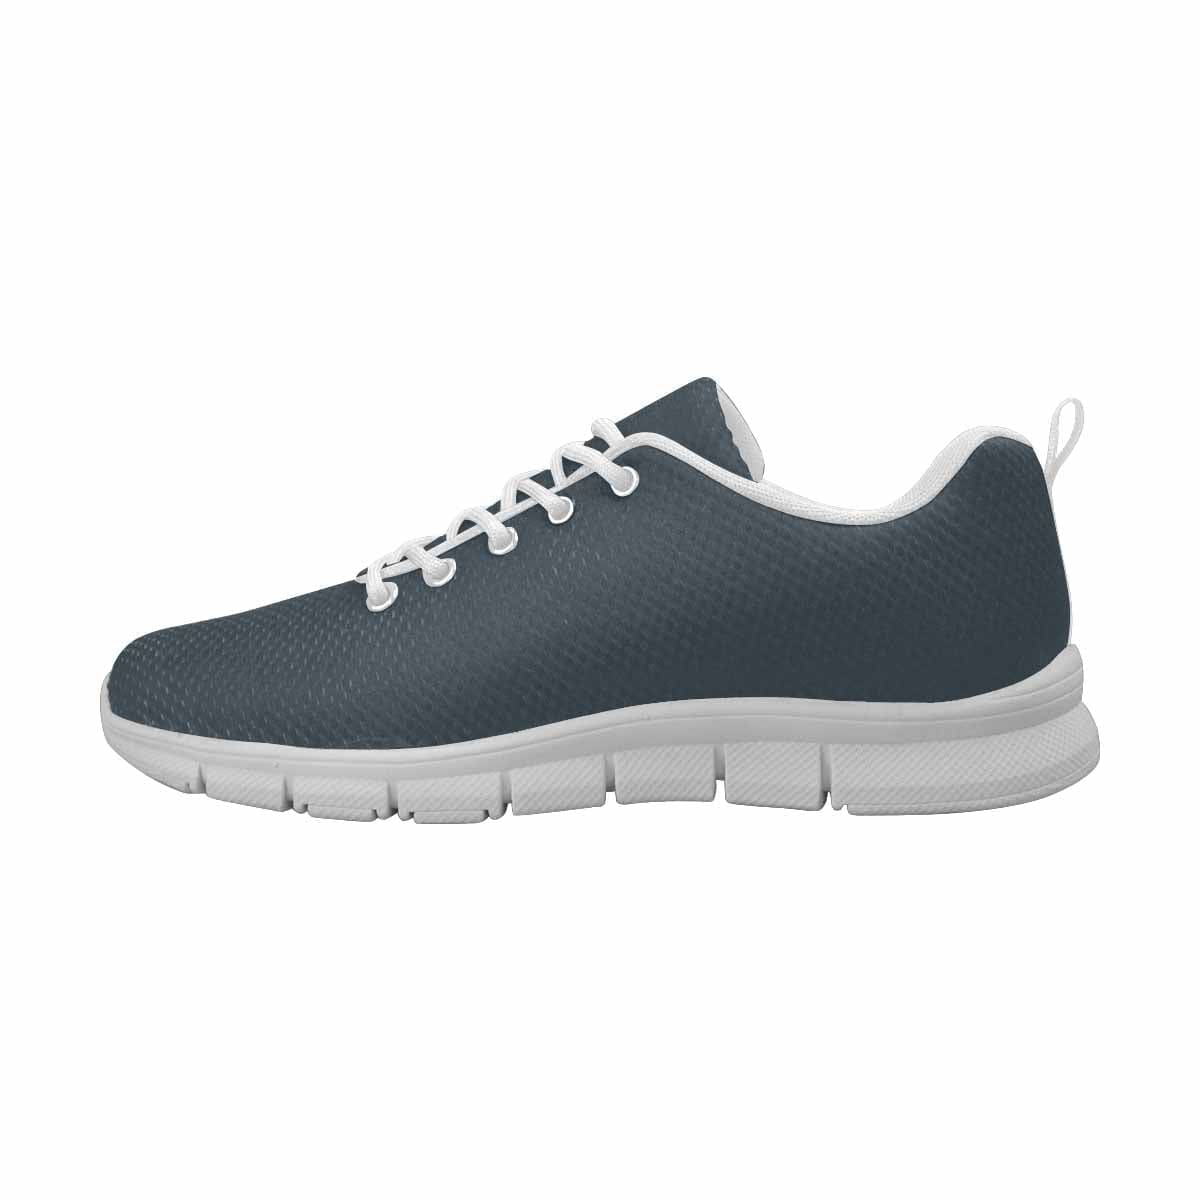 Sneakers For Men Charcoal Black - Running Shoes - Mens | Sneakers | Running